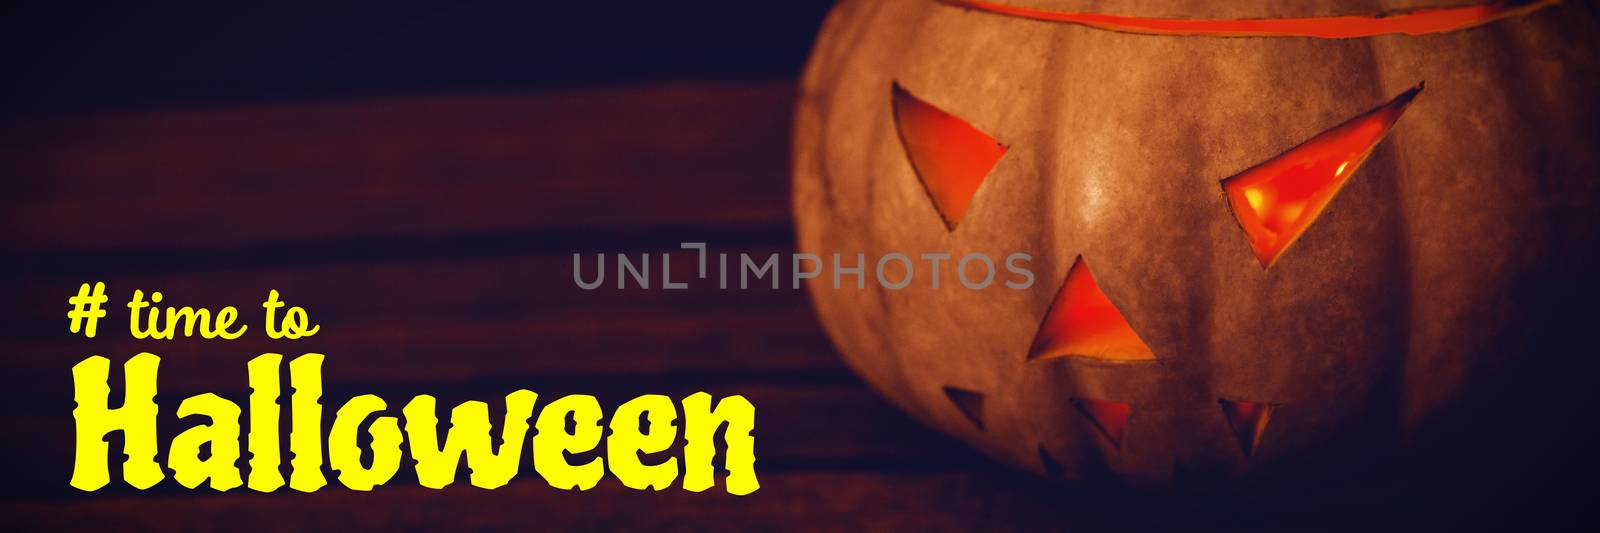 Composite image of digital image of time to halloween text by Wavebreakmedia